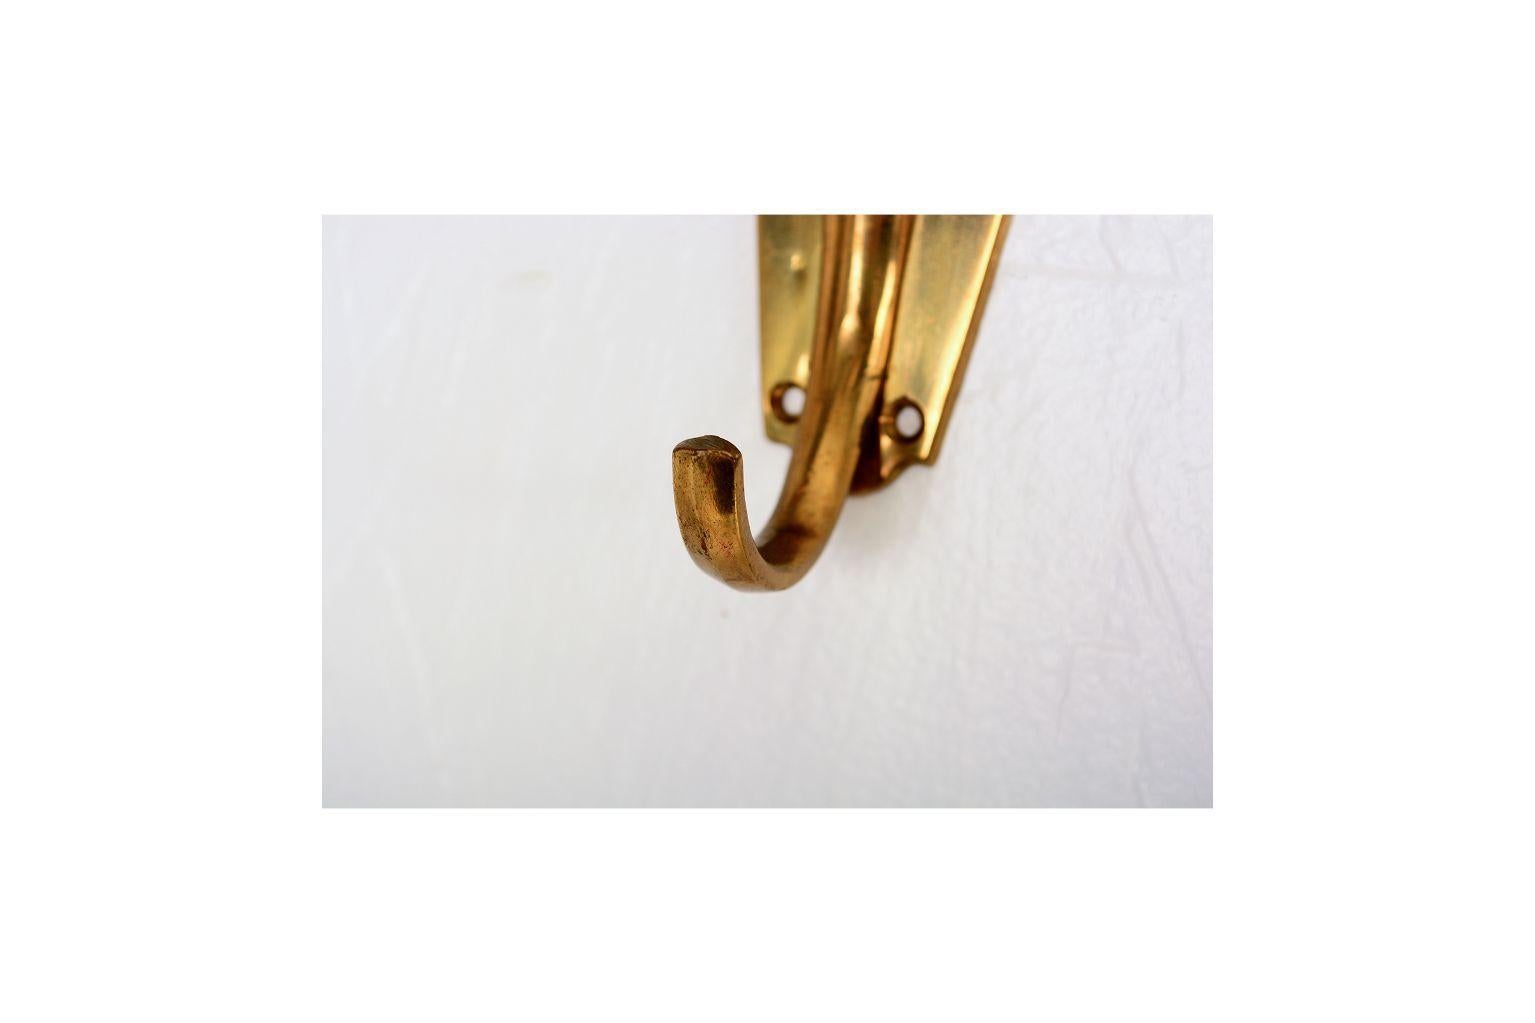 From AMBIANIC
Set of three wall coat hook racks in the style of Fontana Arte. 
Lucite Acrylic on brass. Italy, 1950s. 
Dimensions: H 5.5 in. x W 5.4 in. x D 2.7 in. 
Original vintage preowned condition, refer to images. 
